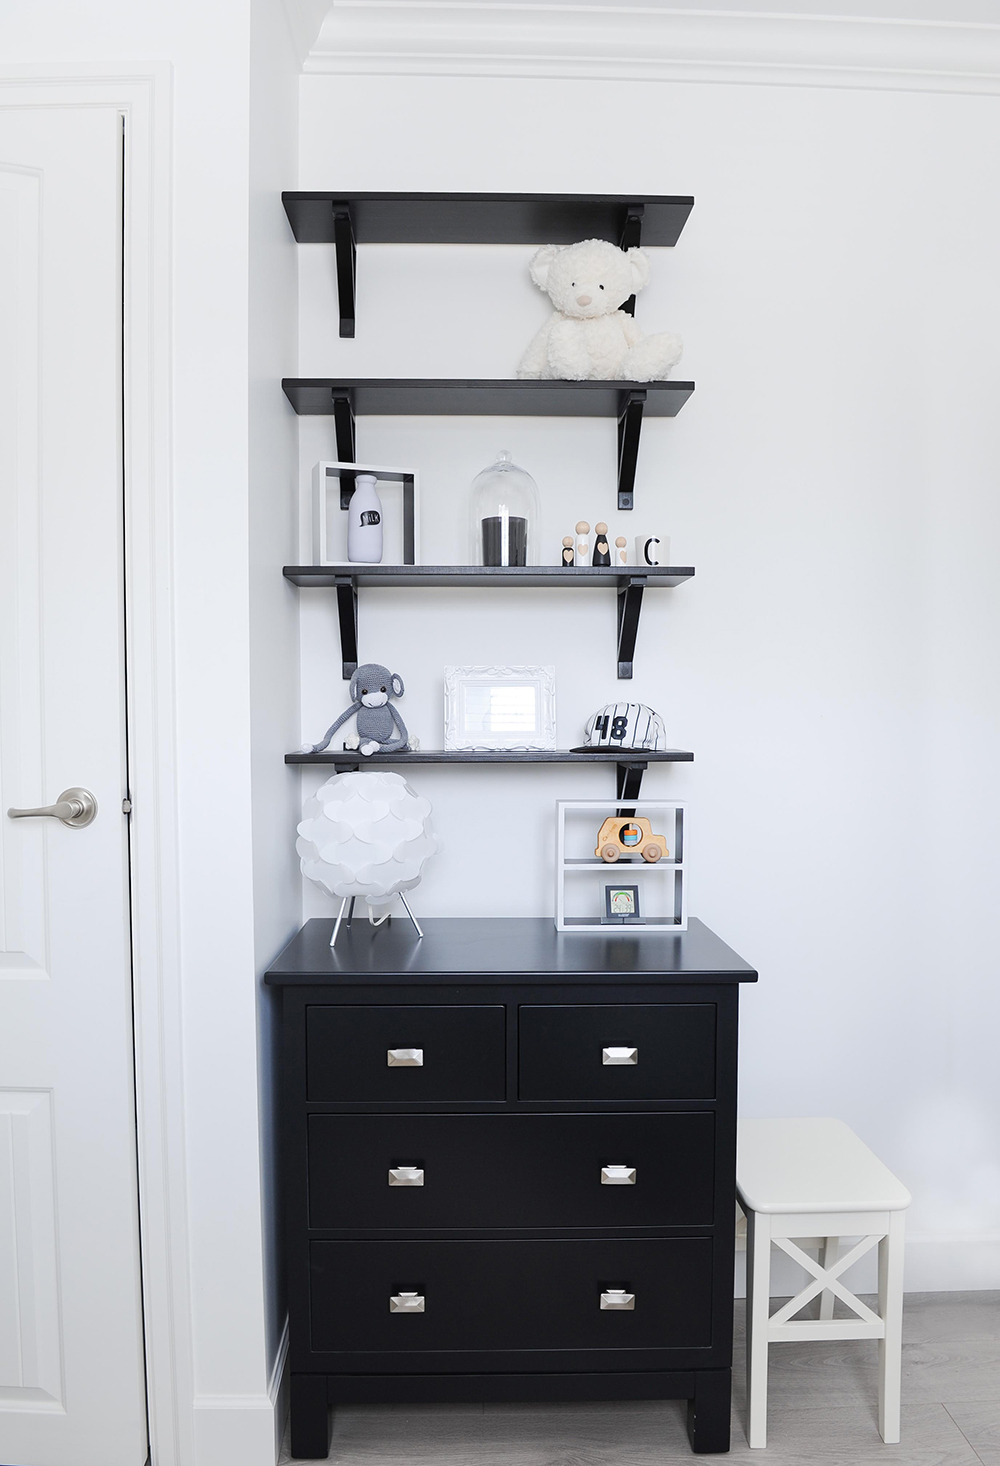 Kids' room with black dresser and open shelving above